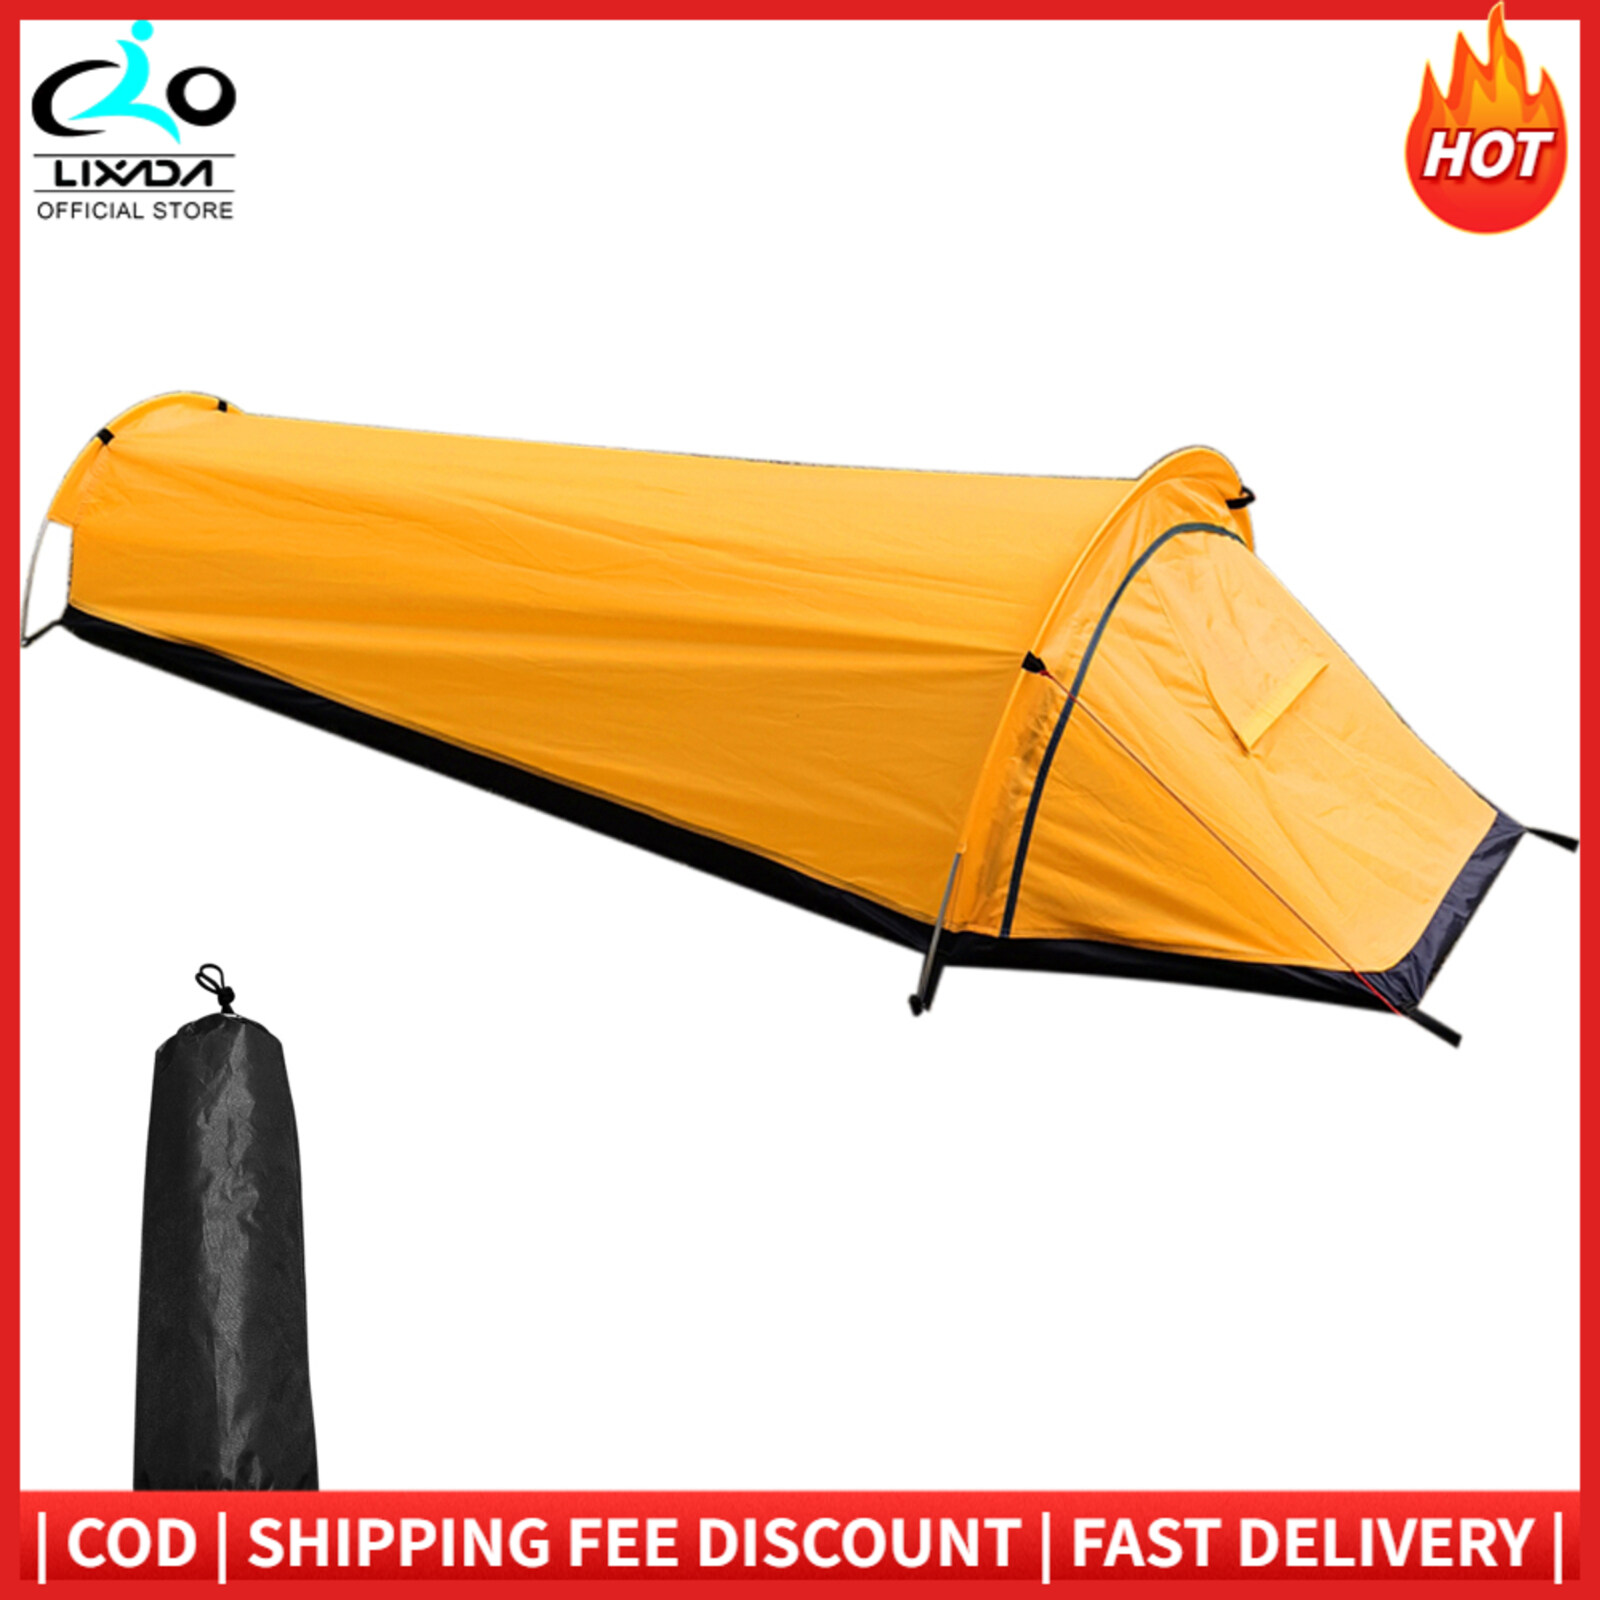 Backpacking Tent Outdoor Camping Sleeping Bag Tent Lightweight Single